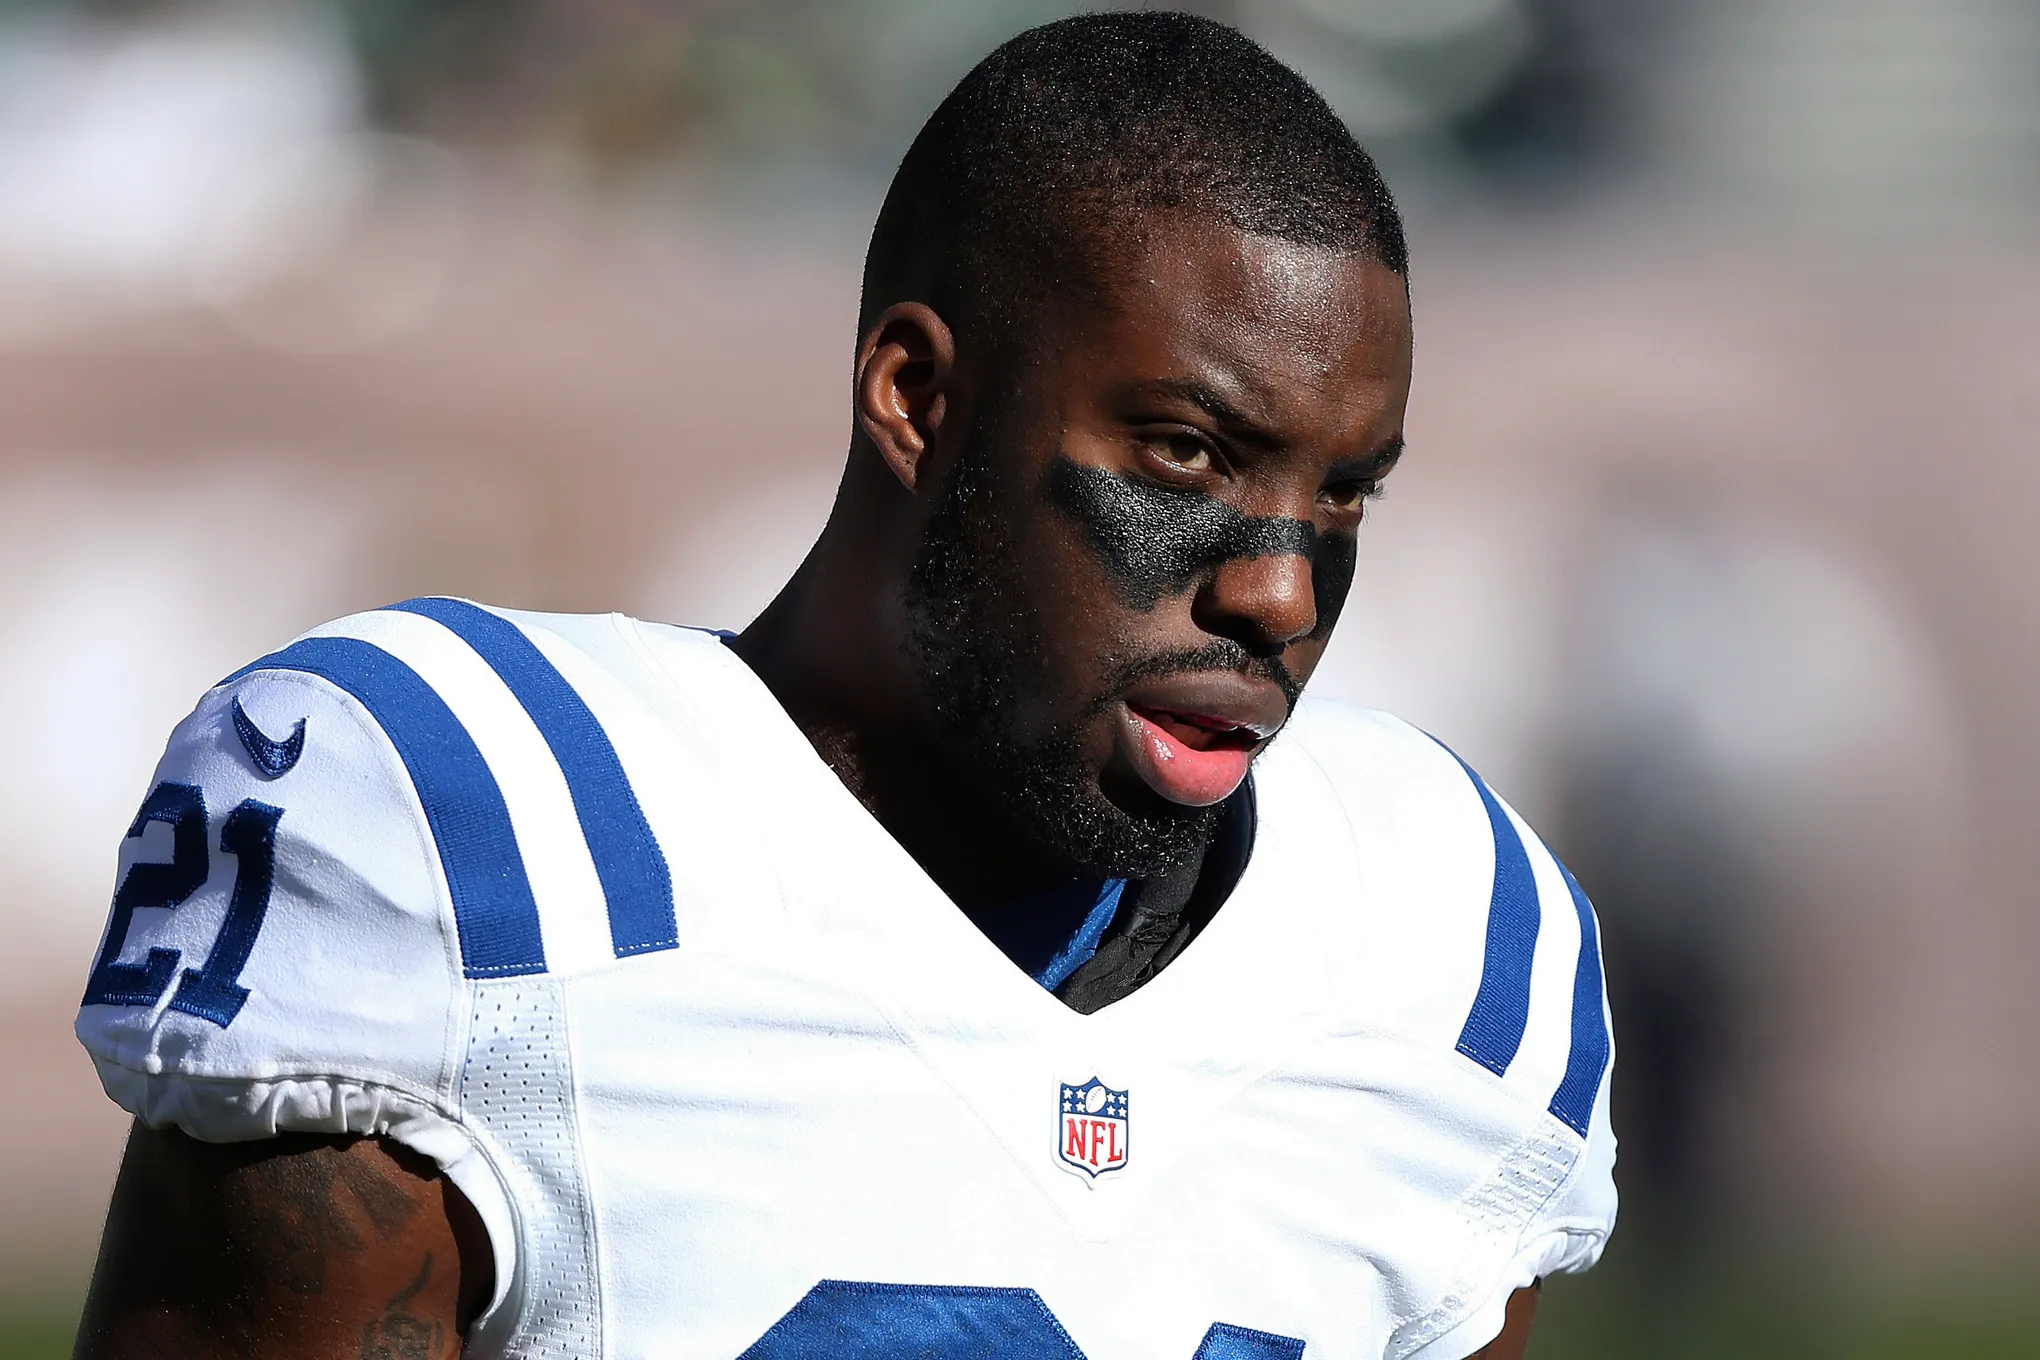 Former Dolphins player Vontae Davis found dead in his South Florida home